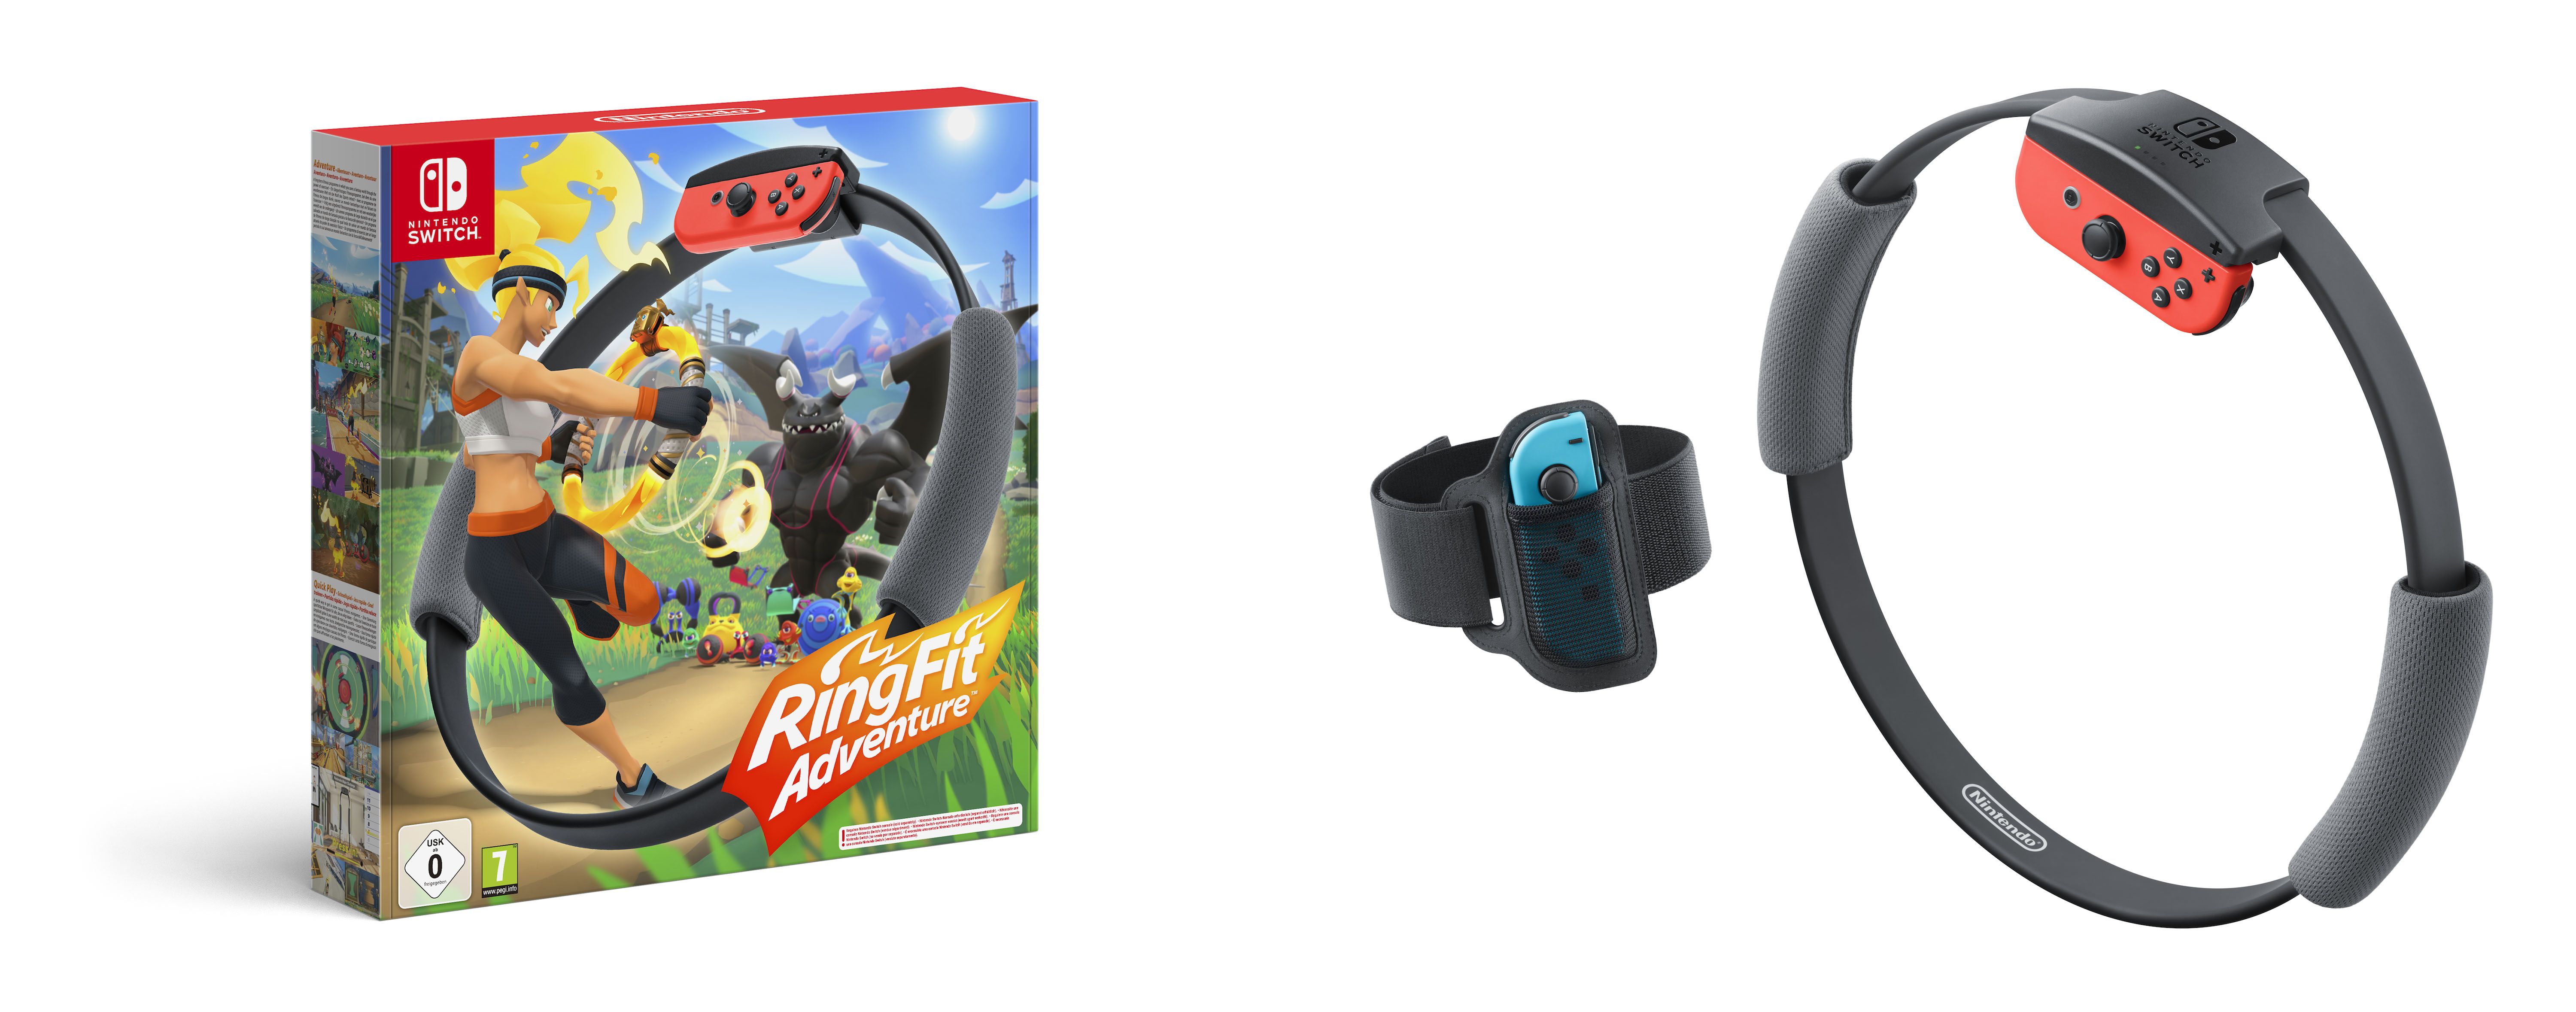 Ring Fit Holder : Ring-con Holder x Leg Strap, for your Ring Fit Adventure,  a Nintendo Switch game. 